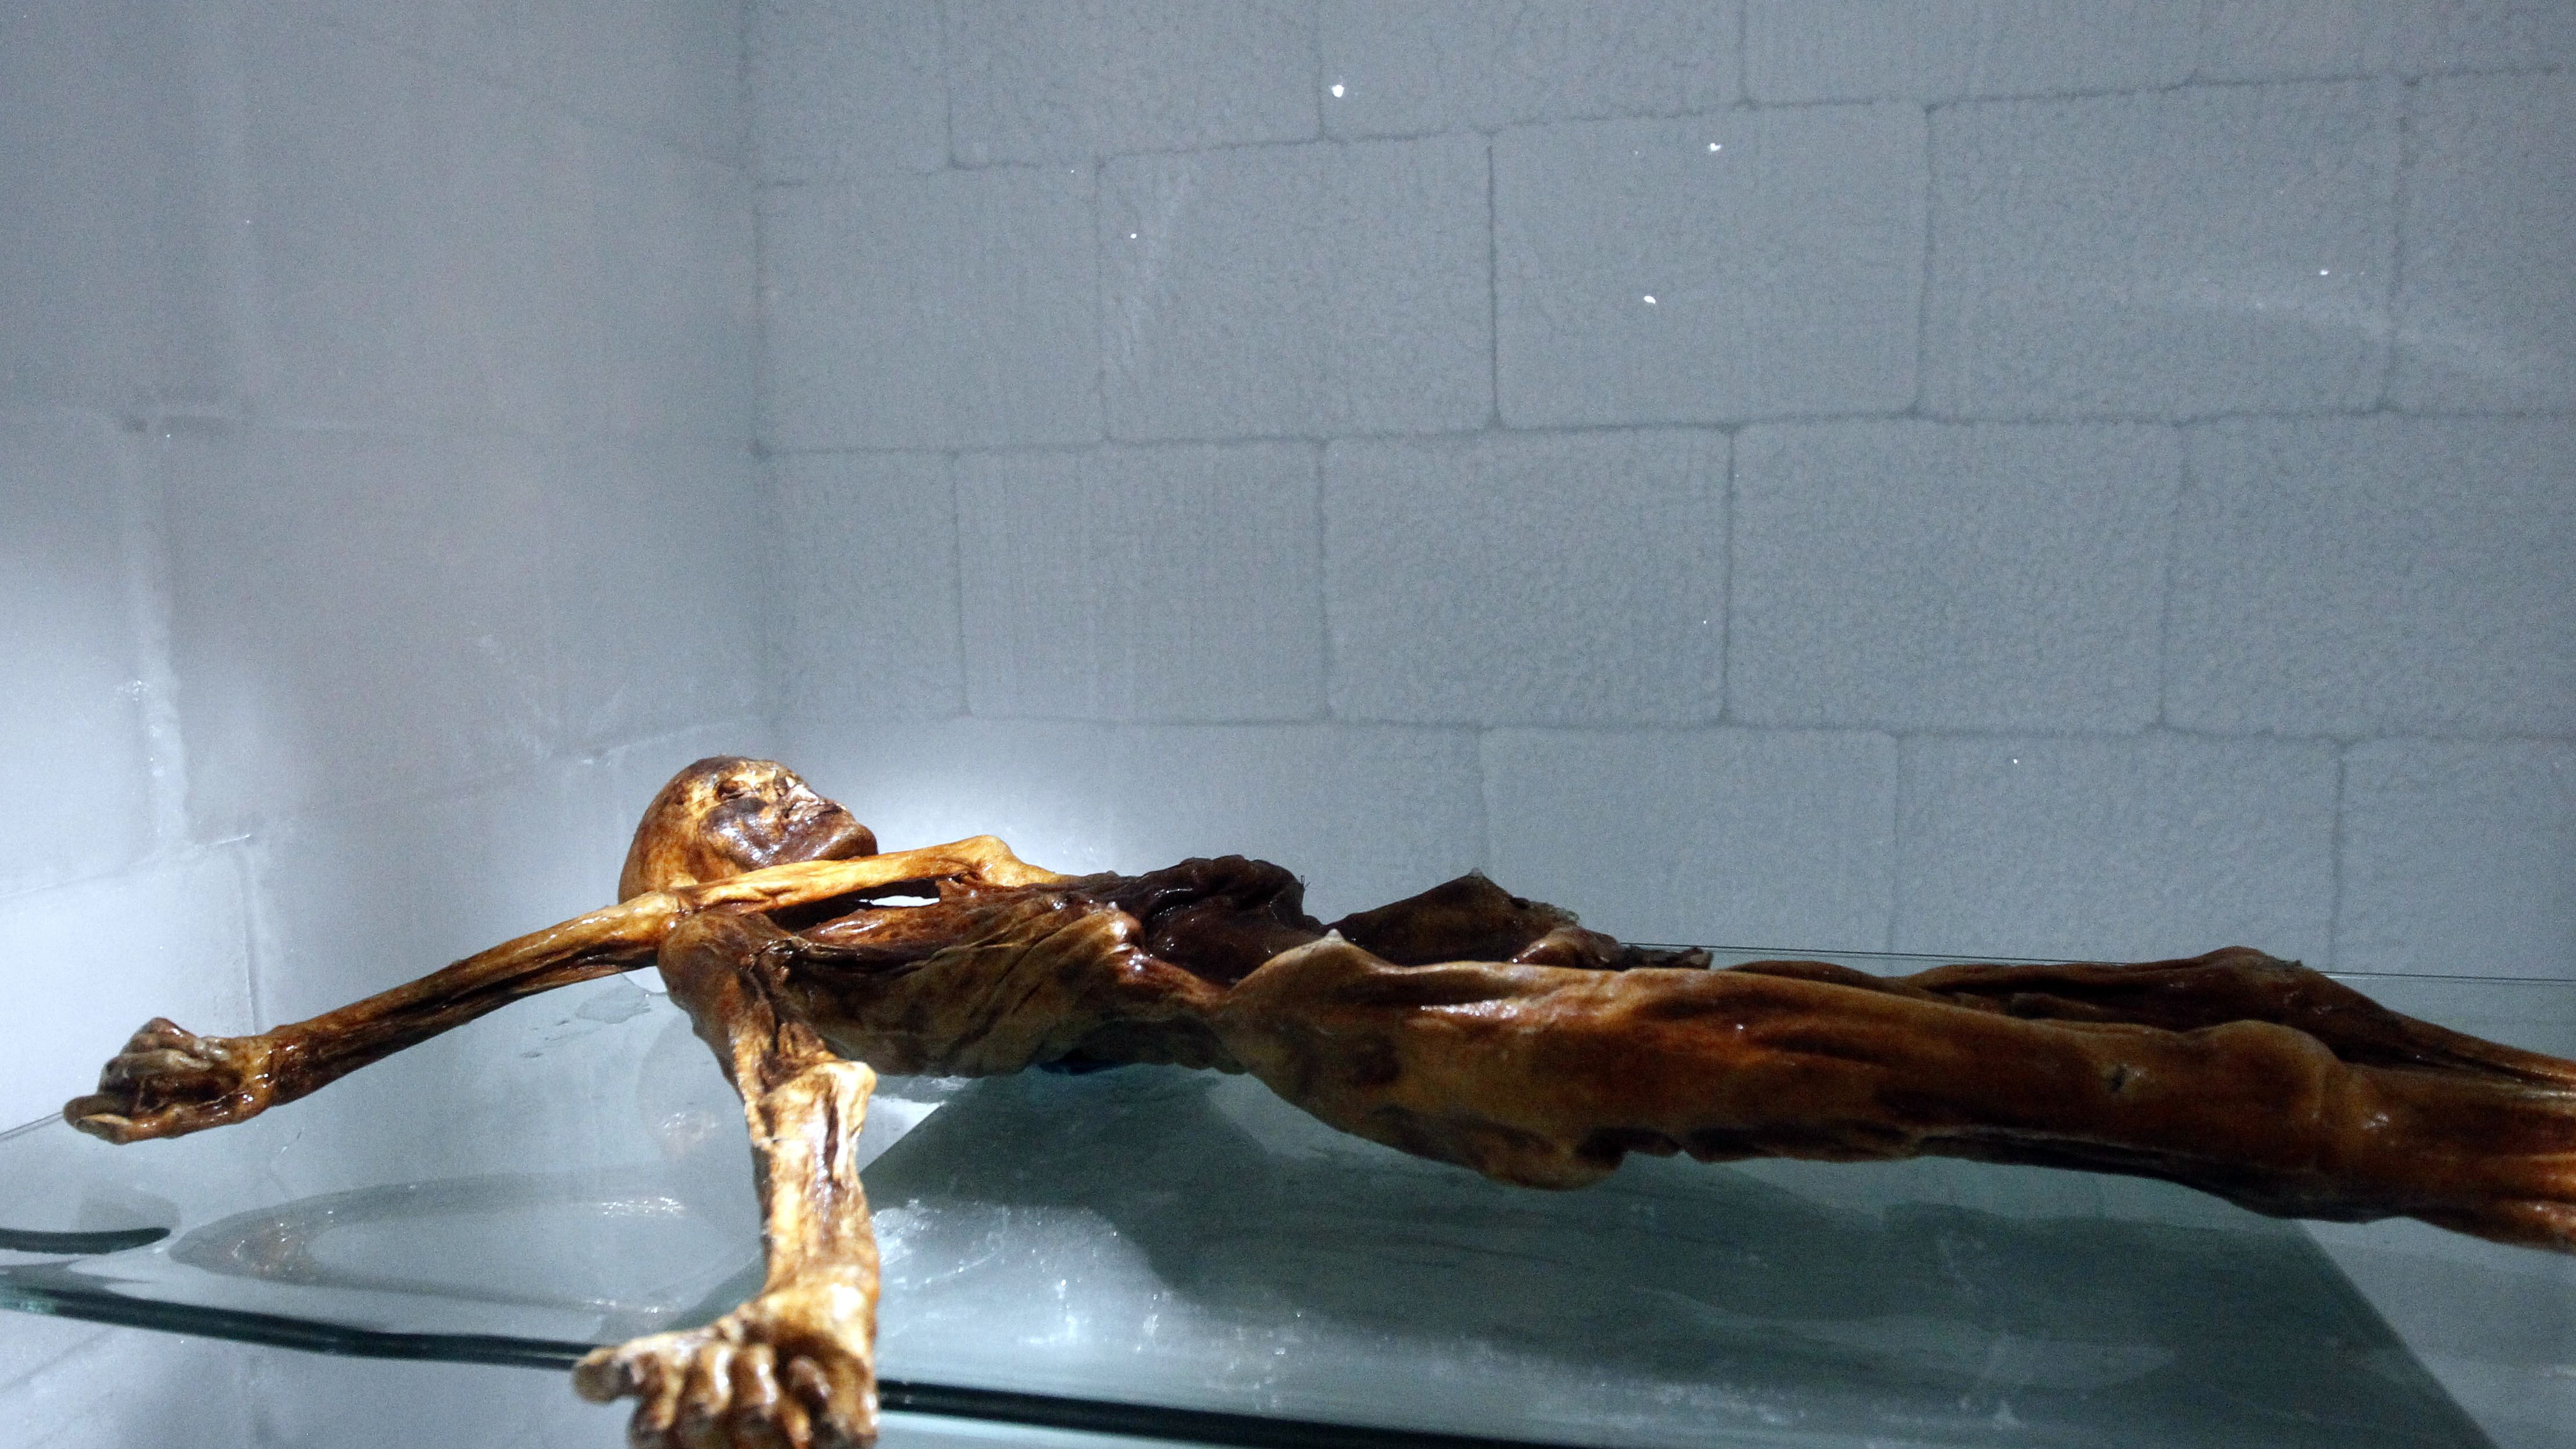 The mummy of Otzi the Iceman lies on display at the Archaeological Museum of Bolzano in Italy. 